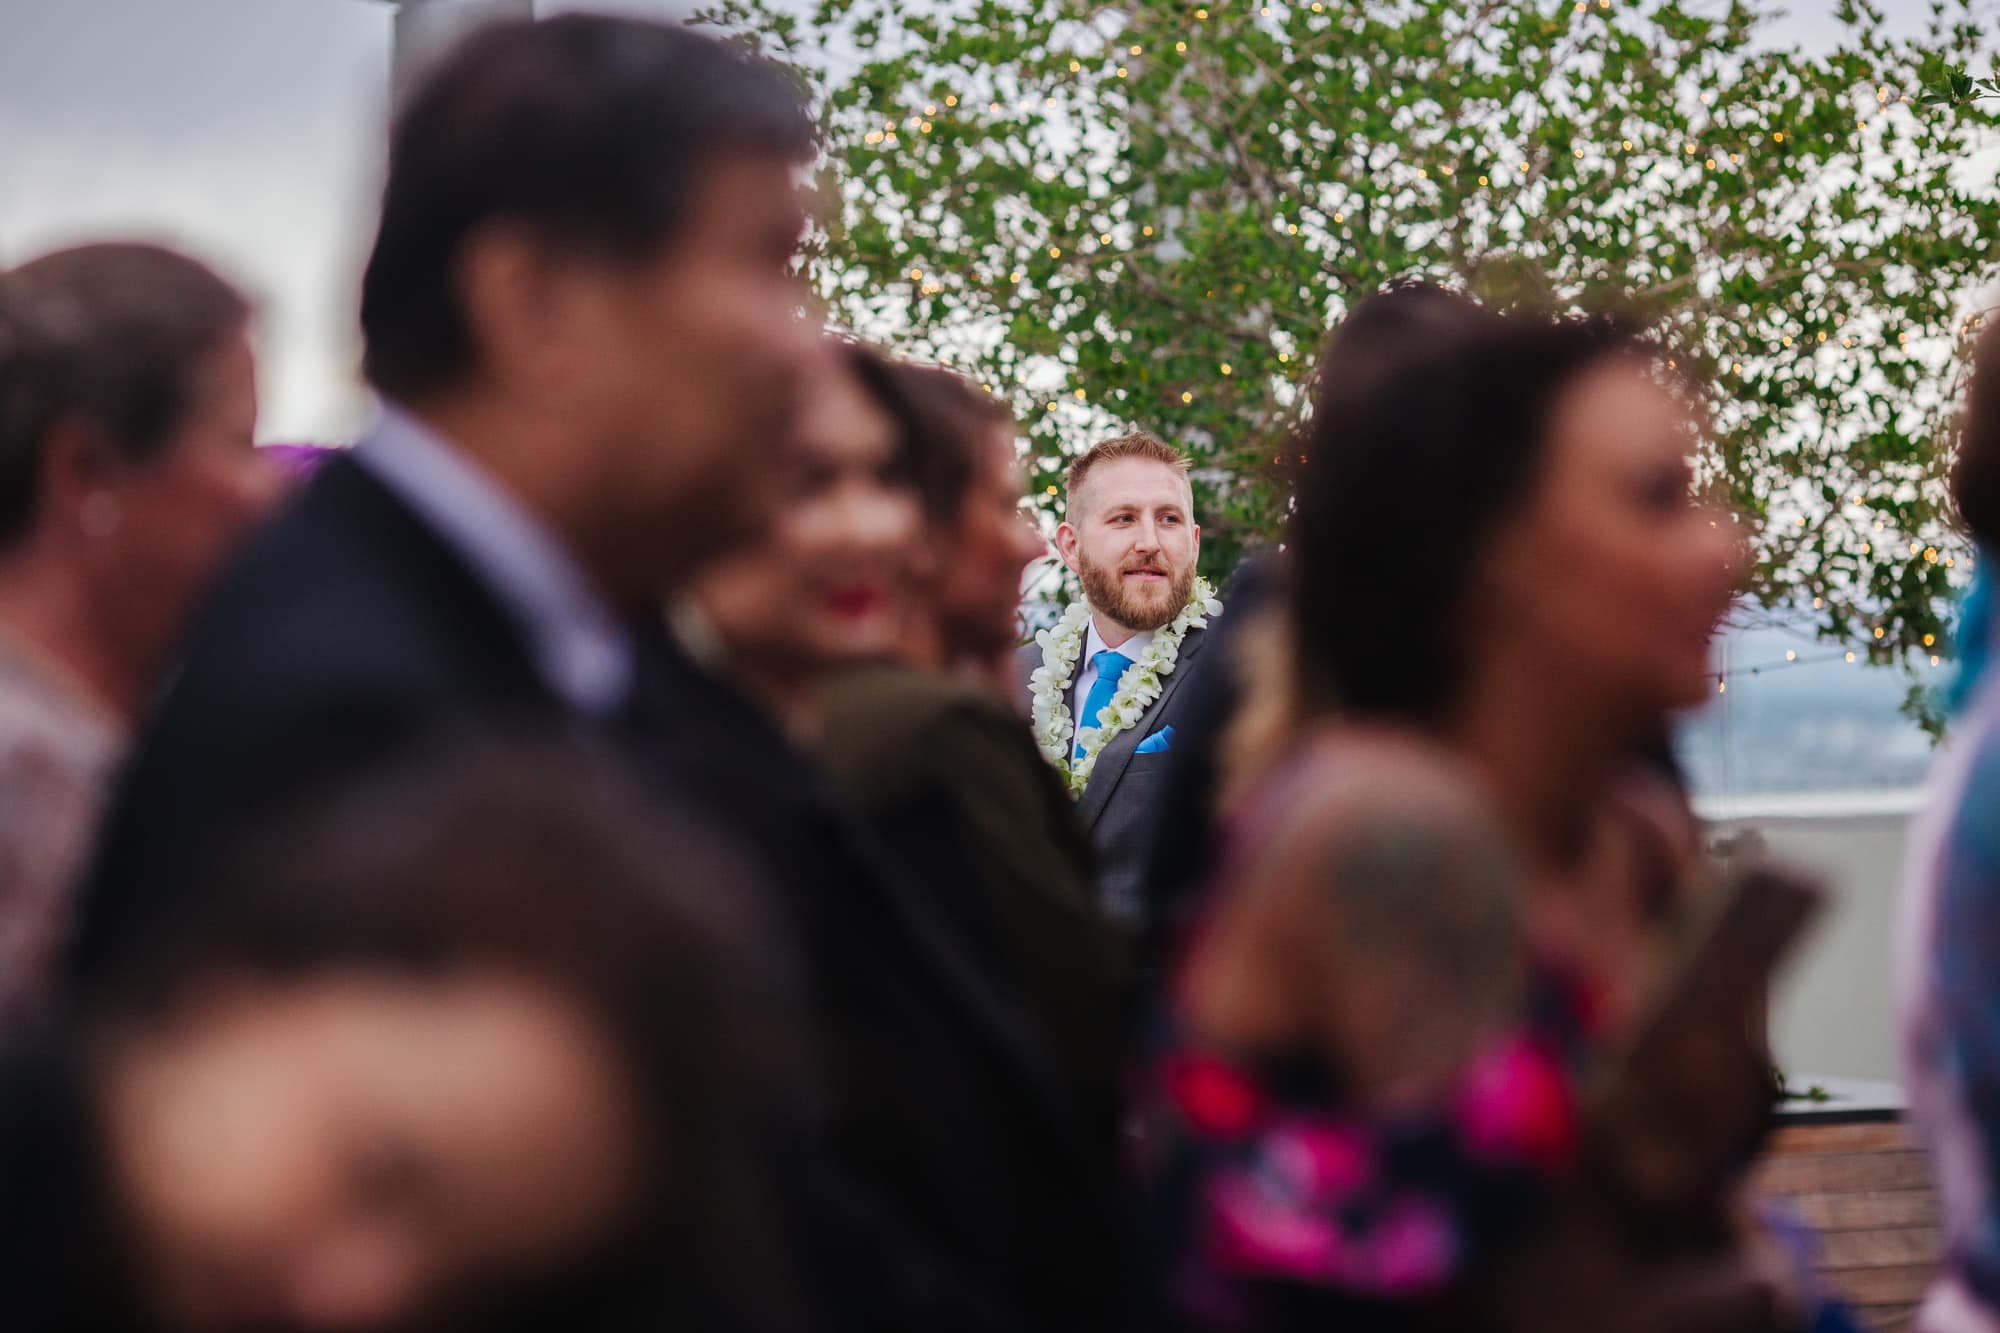 grooms reaction, groom seeing bride, groom seeing bride for first time, rooftop wedding ceremony, wedding ceremony